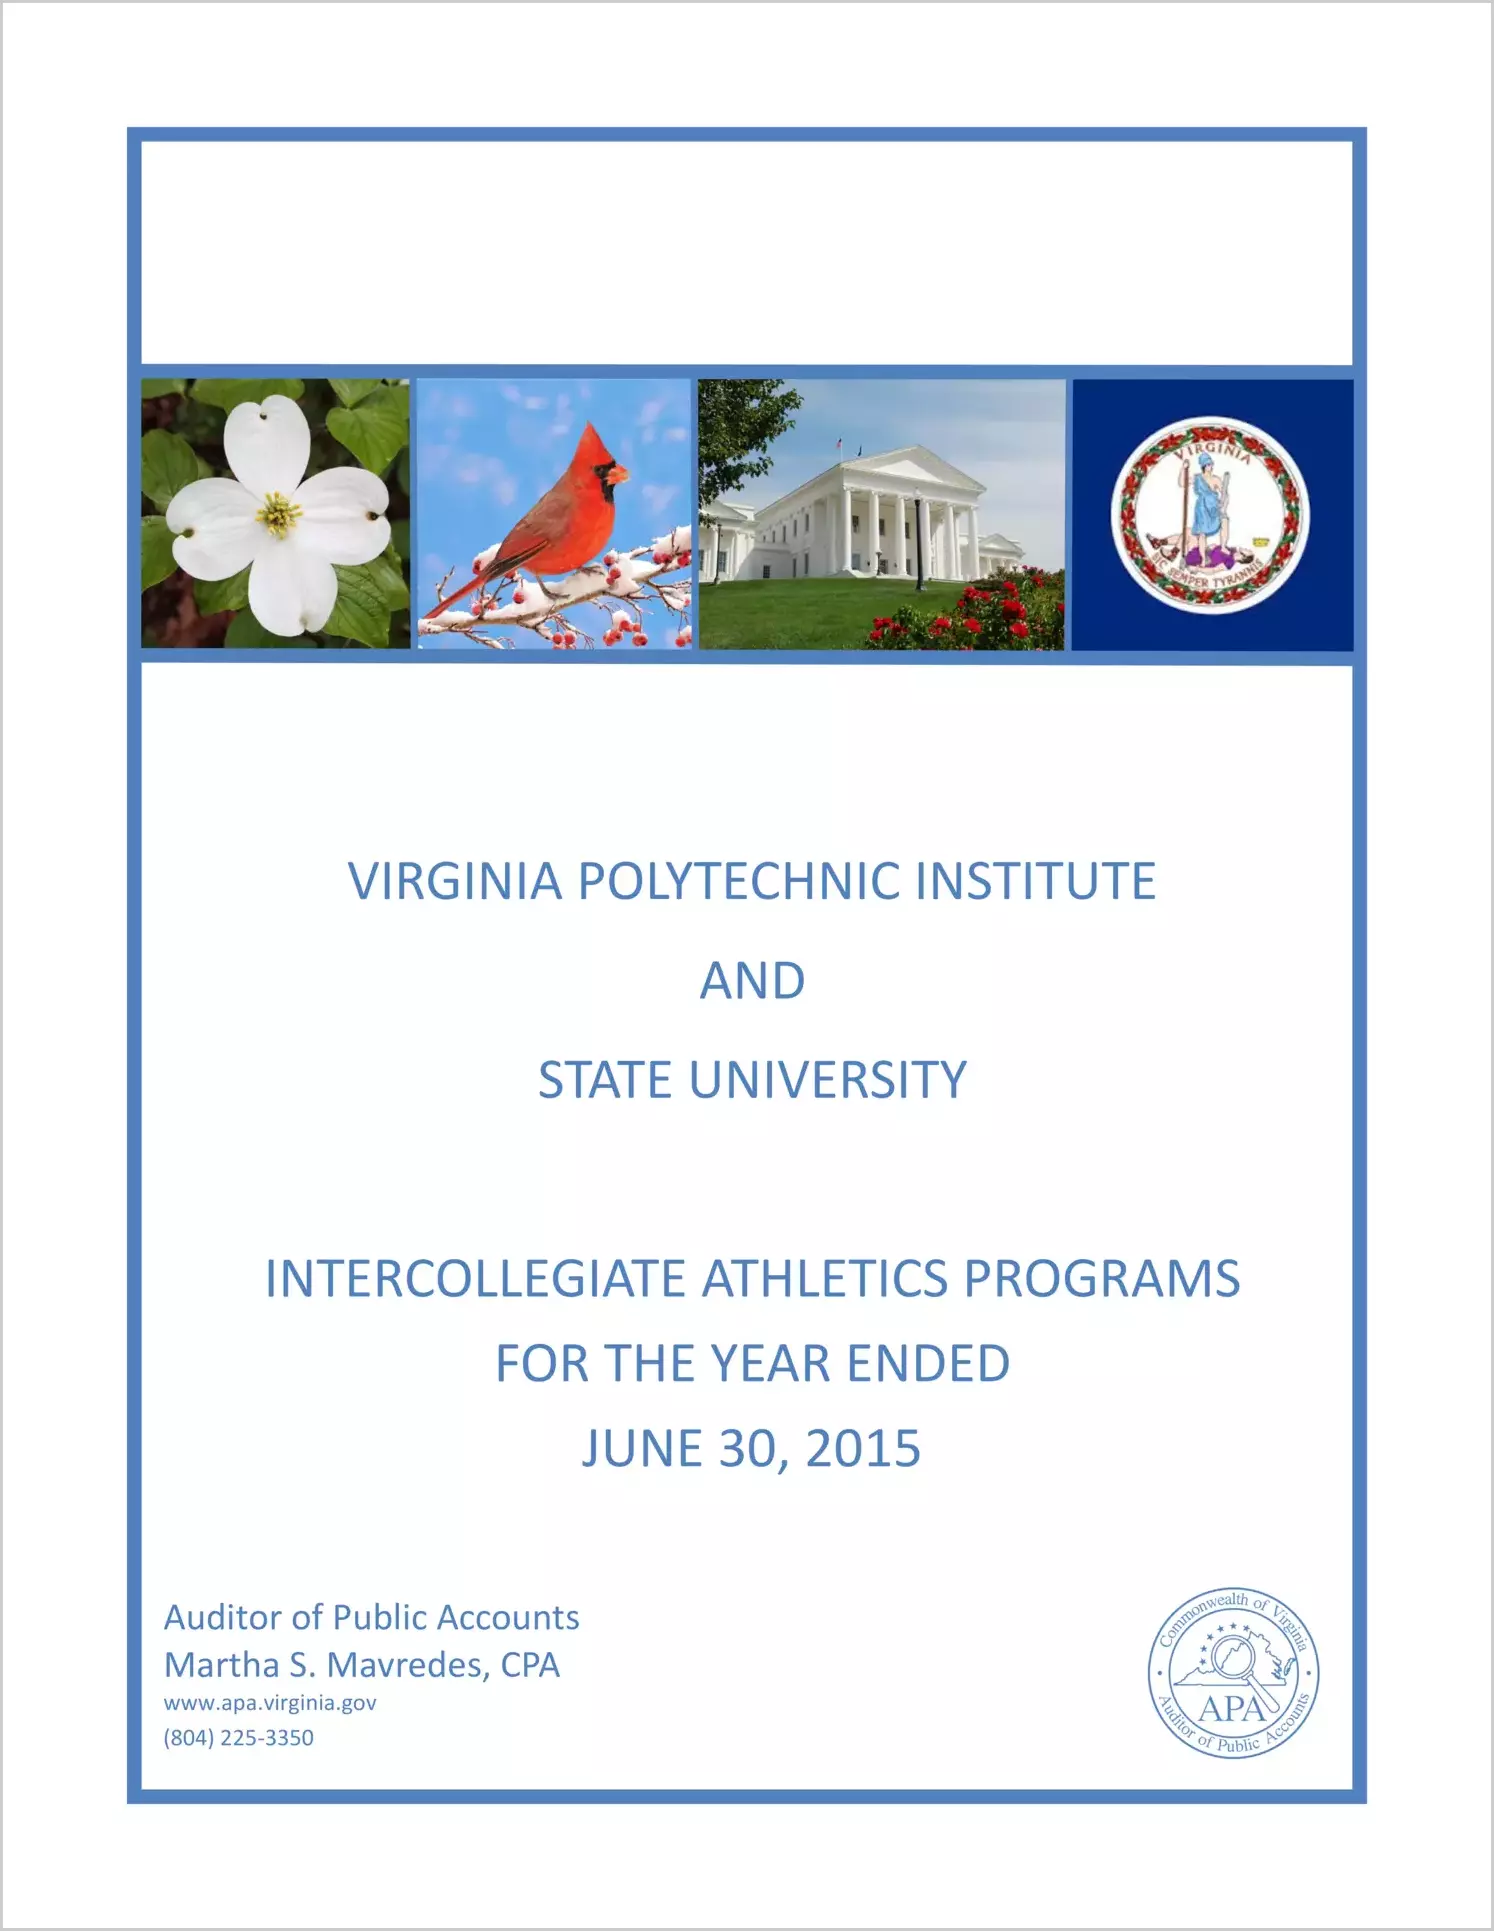 Virginia Polytechnic Institute and State University Intercollegiate Athletics Programs for the year ended June 30, 2015